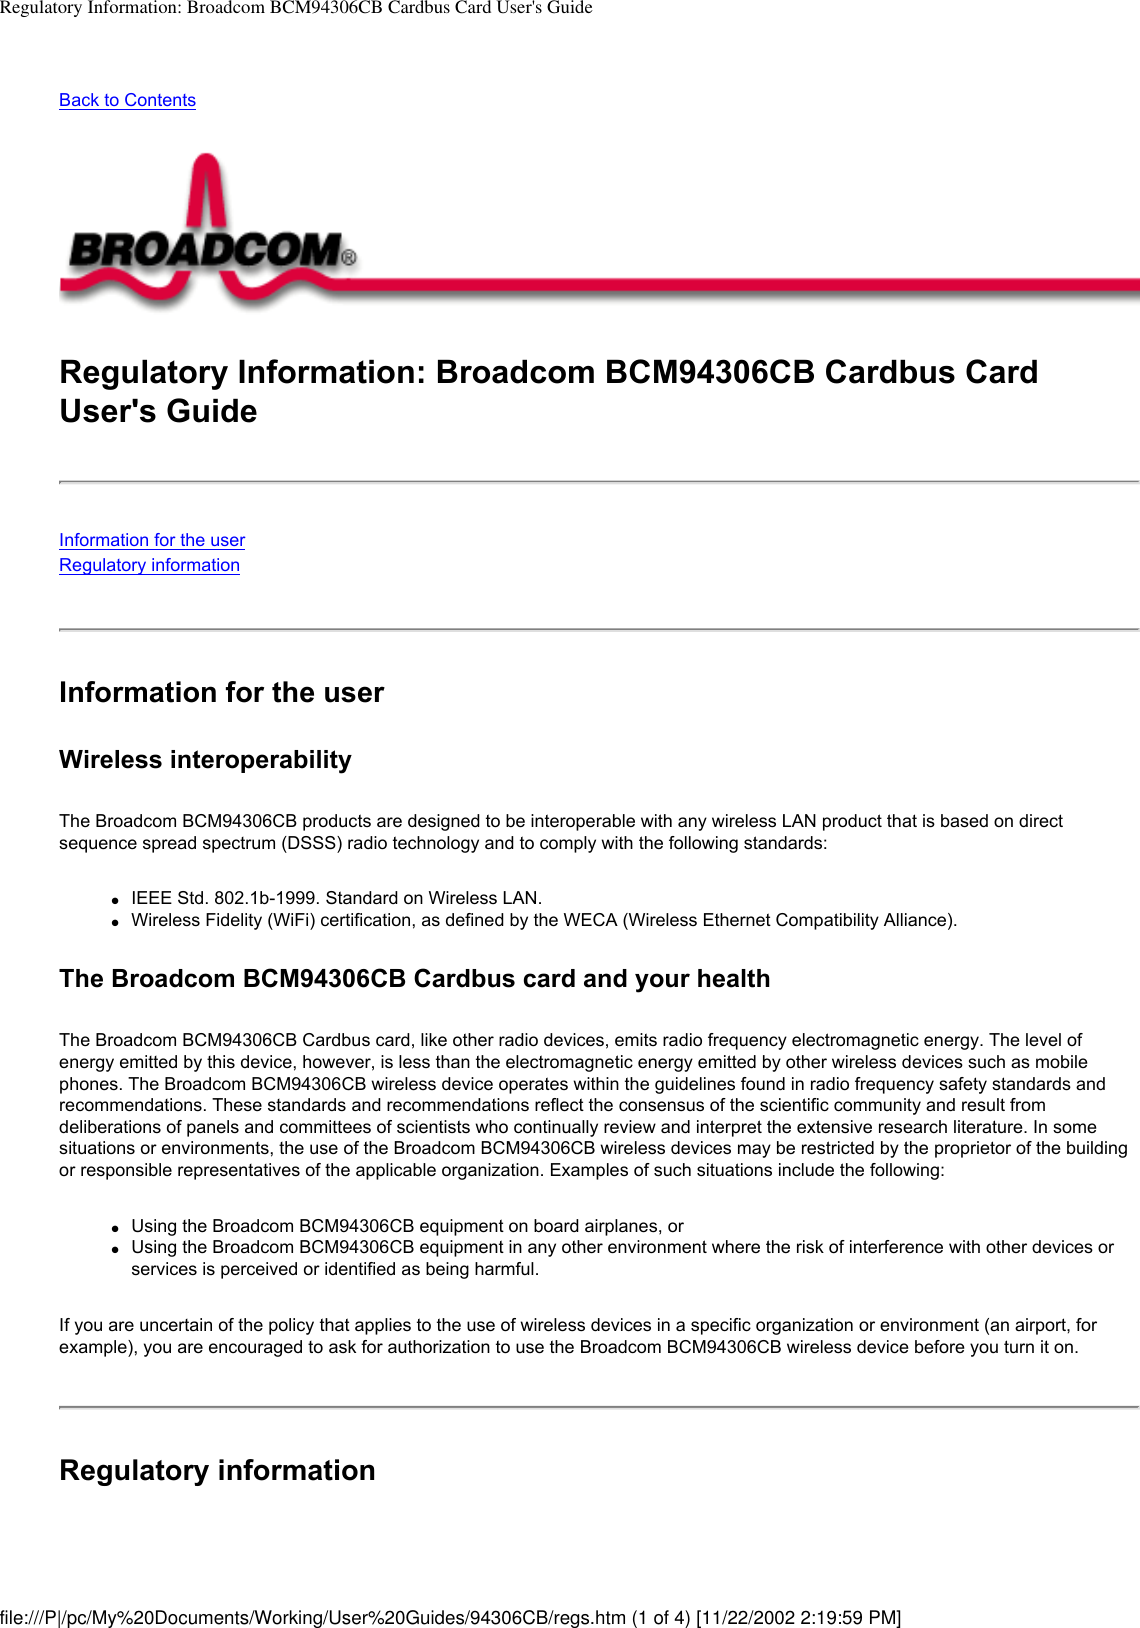 Regulatory Information: Broadcom BCM94306CB Cardbus Card User&apos;s GuideBack to ContentsRegulatory Information: Broadcom BCM94306CB Cardbus Card User&apos;s GuideInformation for the userRegulatory informationInformation for the userWireless interoperabilityThe Broadcom BCM94306CB products are designed to be interoperable with any wireless LAN product that is based on direct sequence spread spectrum (DSSS) radio technology and to comply with the following standards:●     IEEE Std. 802.1b-1999. Standard on Wireless LAN.●     Wireless Fidelity (WiFi) certification, as defined by the WECA (Wireless Ethernet Compatibility Alliance).The Broadcom BCM94306CB Cardbus card and your healthThe Broadcom BCM94306CB Cardbus card, like other radio devices, emits radio frequency electromagnetic energy. The level of energy emitted by this device, however, is less than the electromagnetic energy emitted by other wireless devices such as mobile phones. The Broadcom BCM94306CB wireless device operates within the guidelines found in radio frequency safety standards and recommendations. These standards and recommendations reflect the consensus of the scientific community and result from deliberations of panels and committees of scientists who continually review and interpret the extensive research literature. In some situations or environments, the use of the Broadcom BCM94306CB wireless devices may be restricted by the proprietor of the building or responsible representatives of the applicable organization. Examples of such situations include the following:●     Using the Broadcom BCM94306CB equipment on board airplanes, or●     Using the Broadcom BCM94306CB equipment in any other environment where the risk of interference with other devices or services is perceived or identified as being harmful.If you are uncertain of the policy that applies to the use of wireless devices in a specific organization or environment (an airport, for example), you are encouraged to ask for authorization to use the Broadcom BCM94306CB wireless device before you turn it on.Regulatory informationfile:///P|/pc/My%20Documents/Working/User%20Guides/94306CB/regs.htm (1 of 4) [11/22/2002 2:19:59 PM]